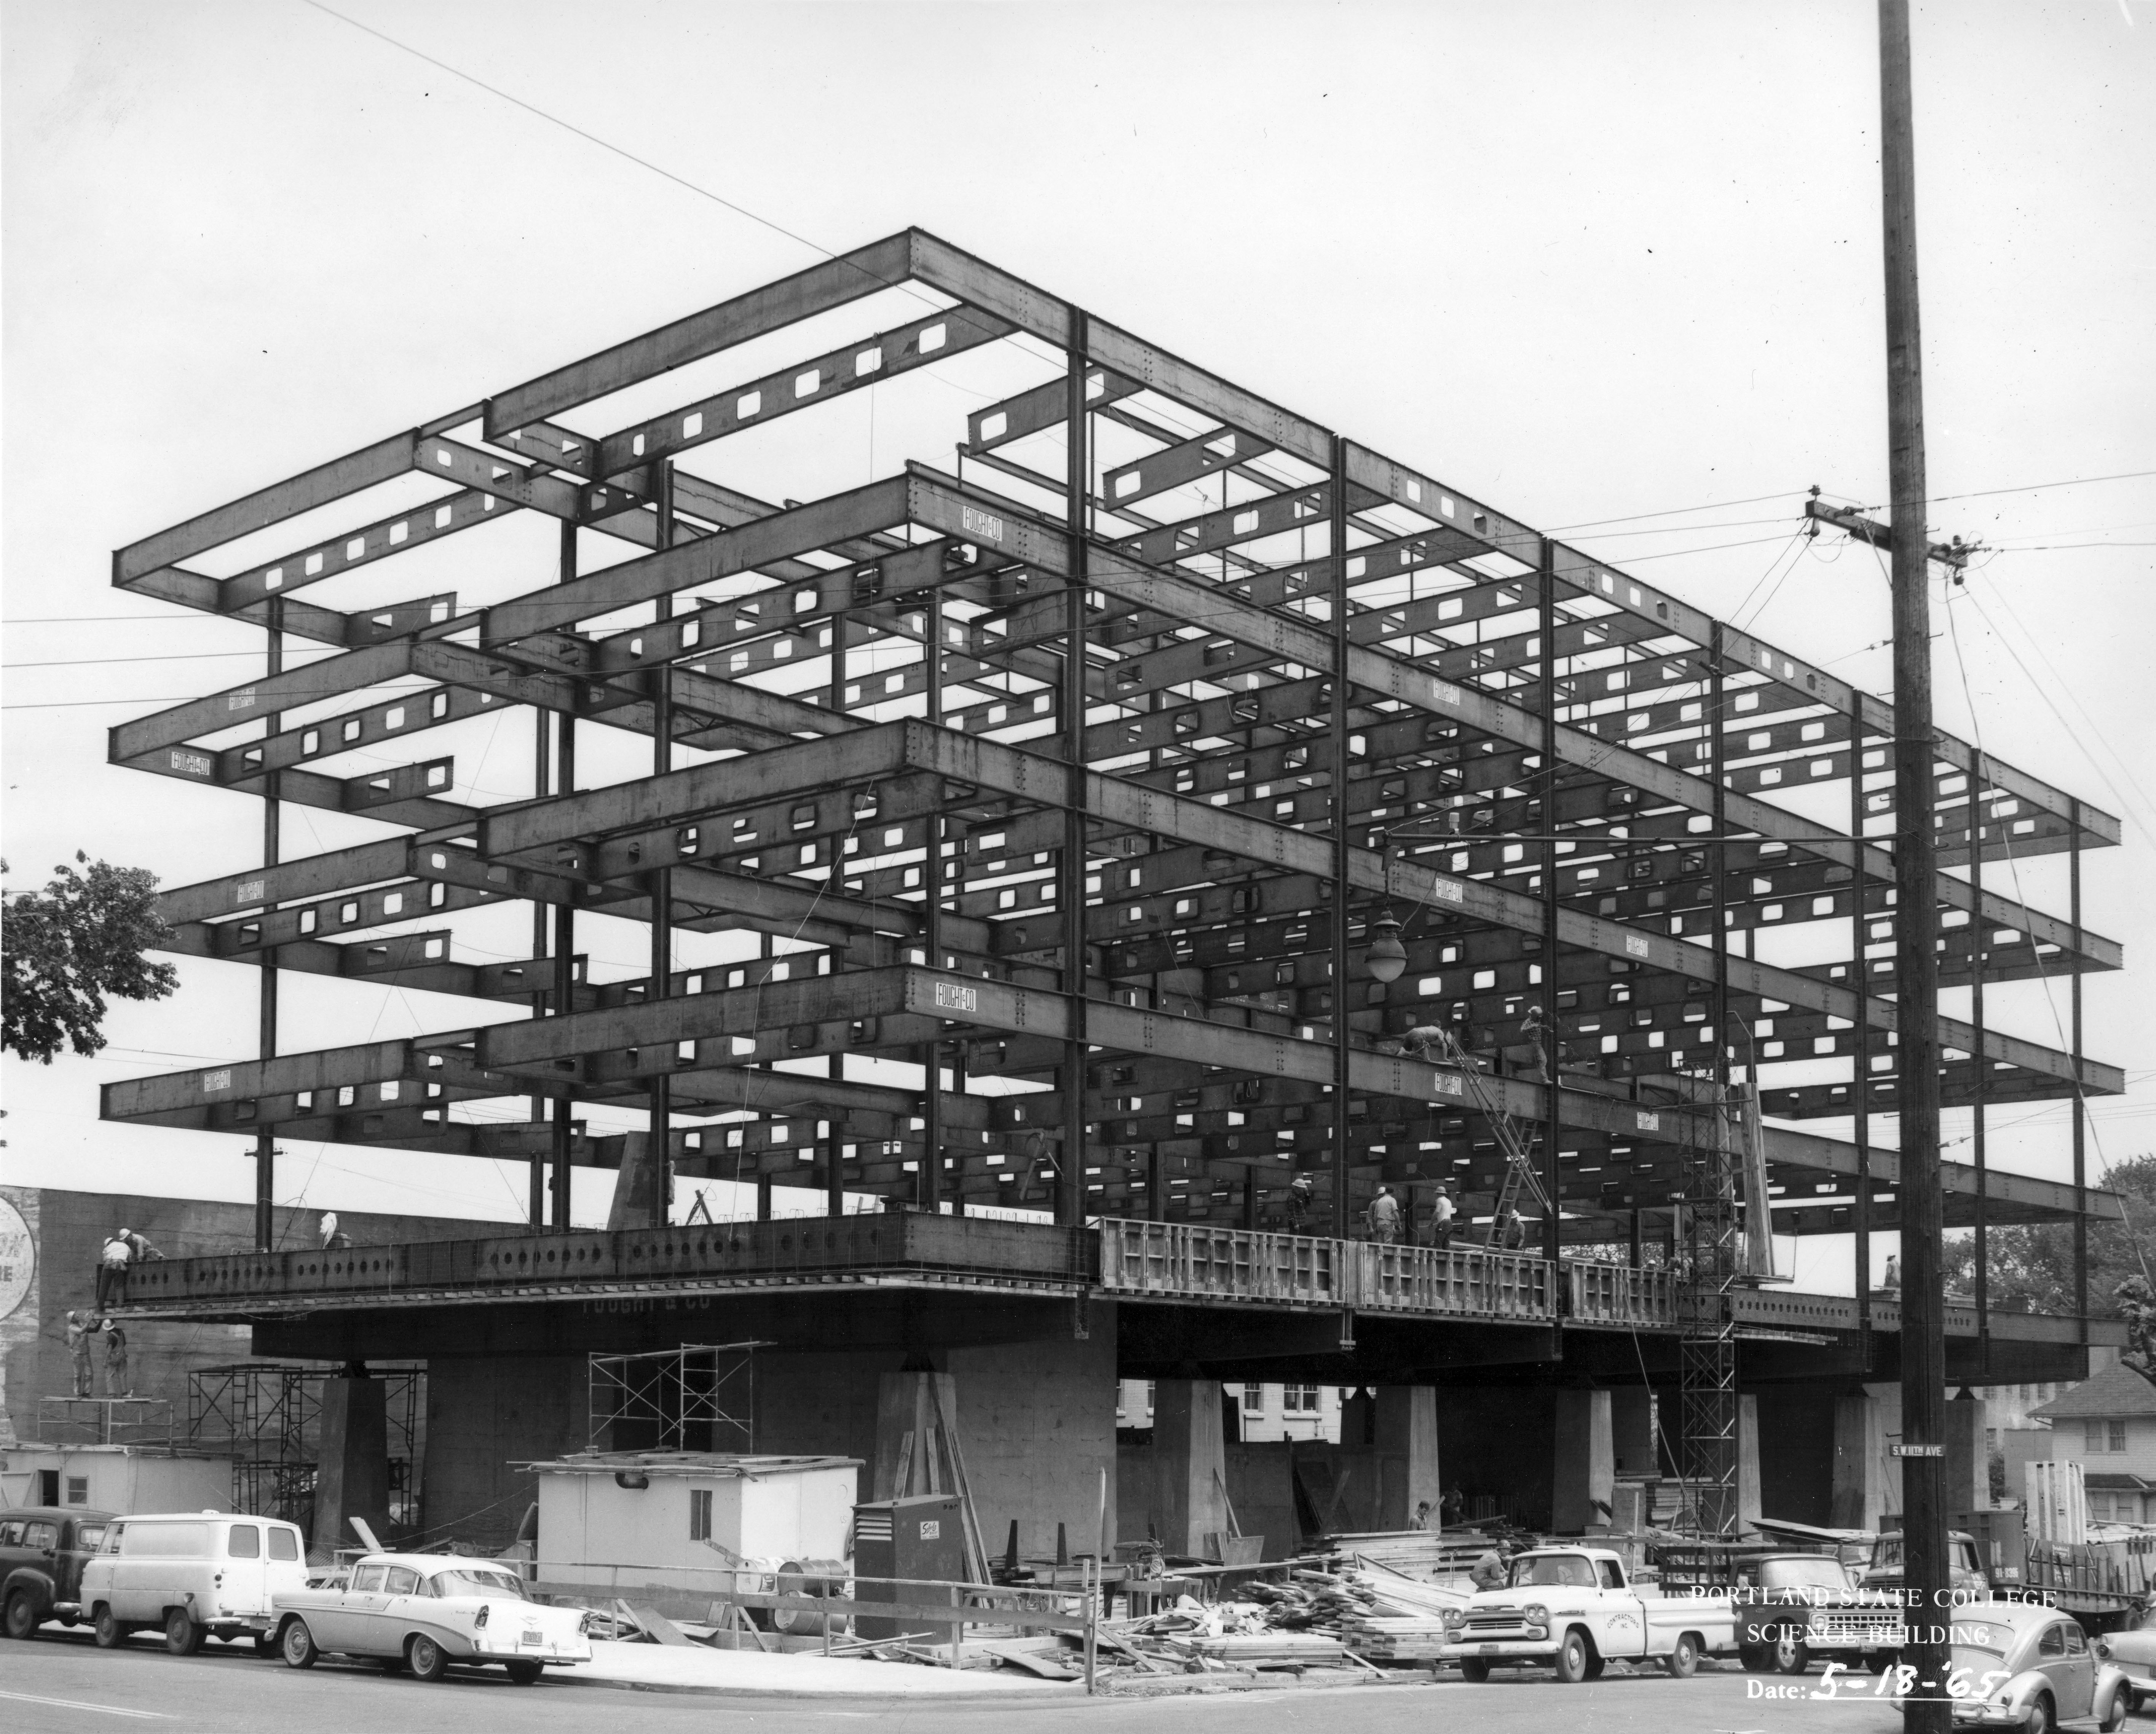 Science 1 under construction in 1965.